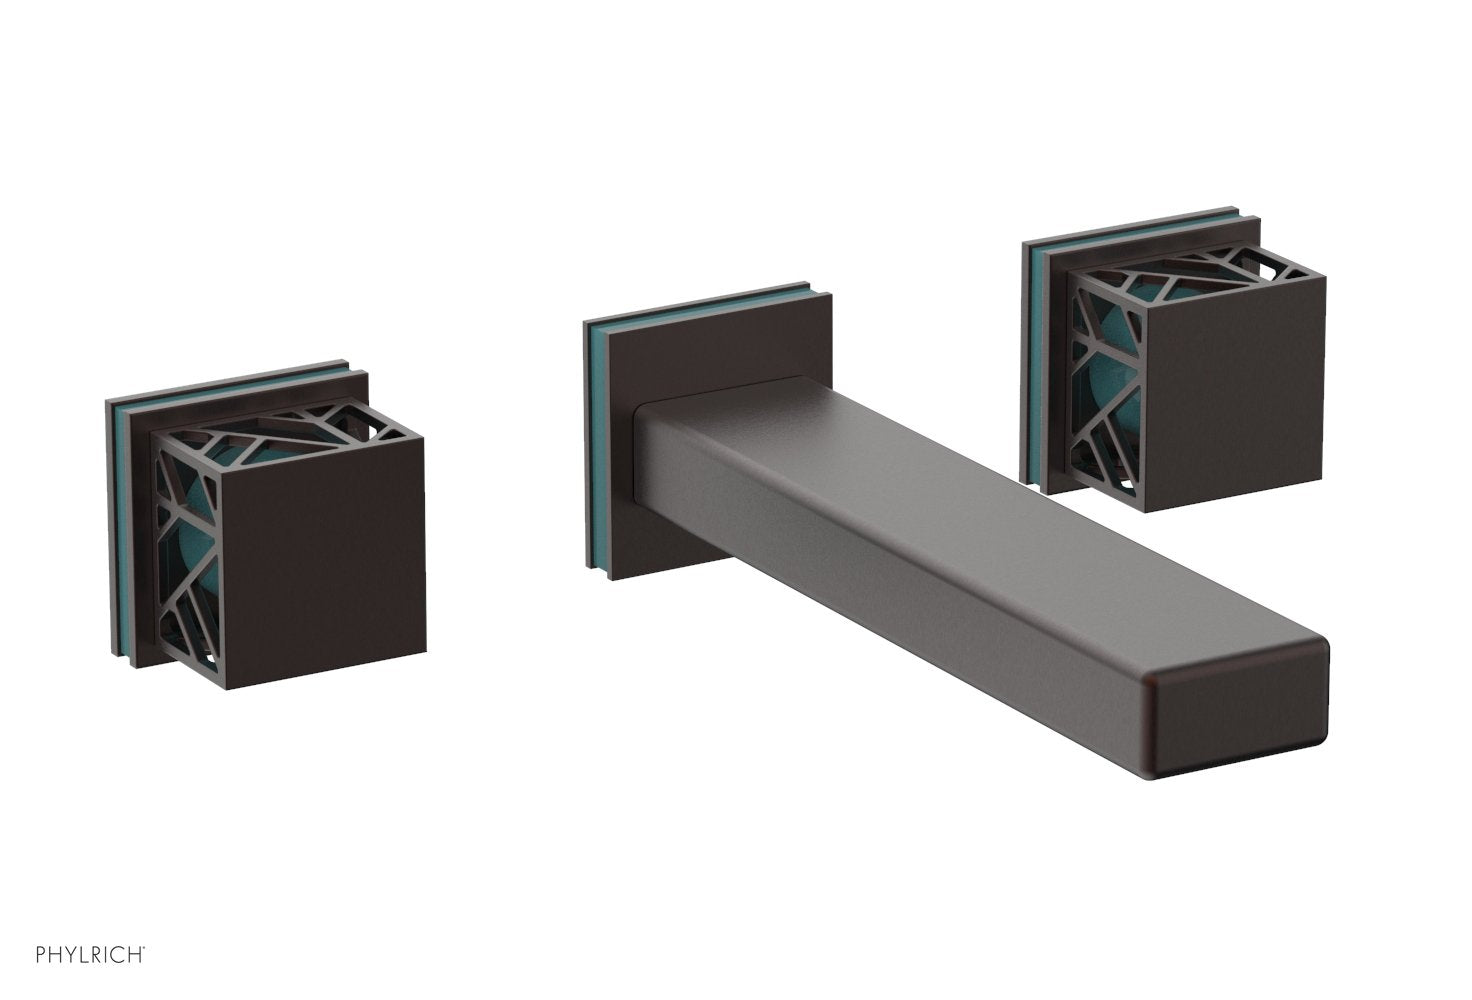 Phylrich JOLIE Wall Tub Set - Square Handles with "Turquoise" Accents